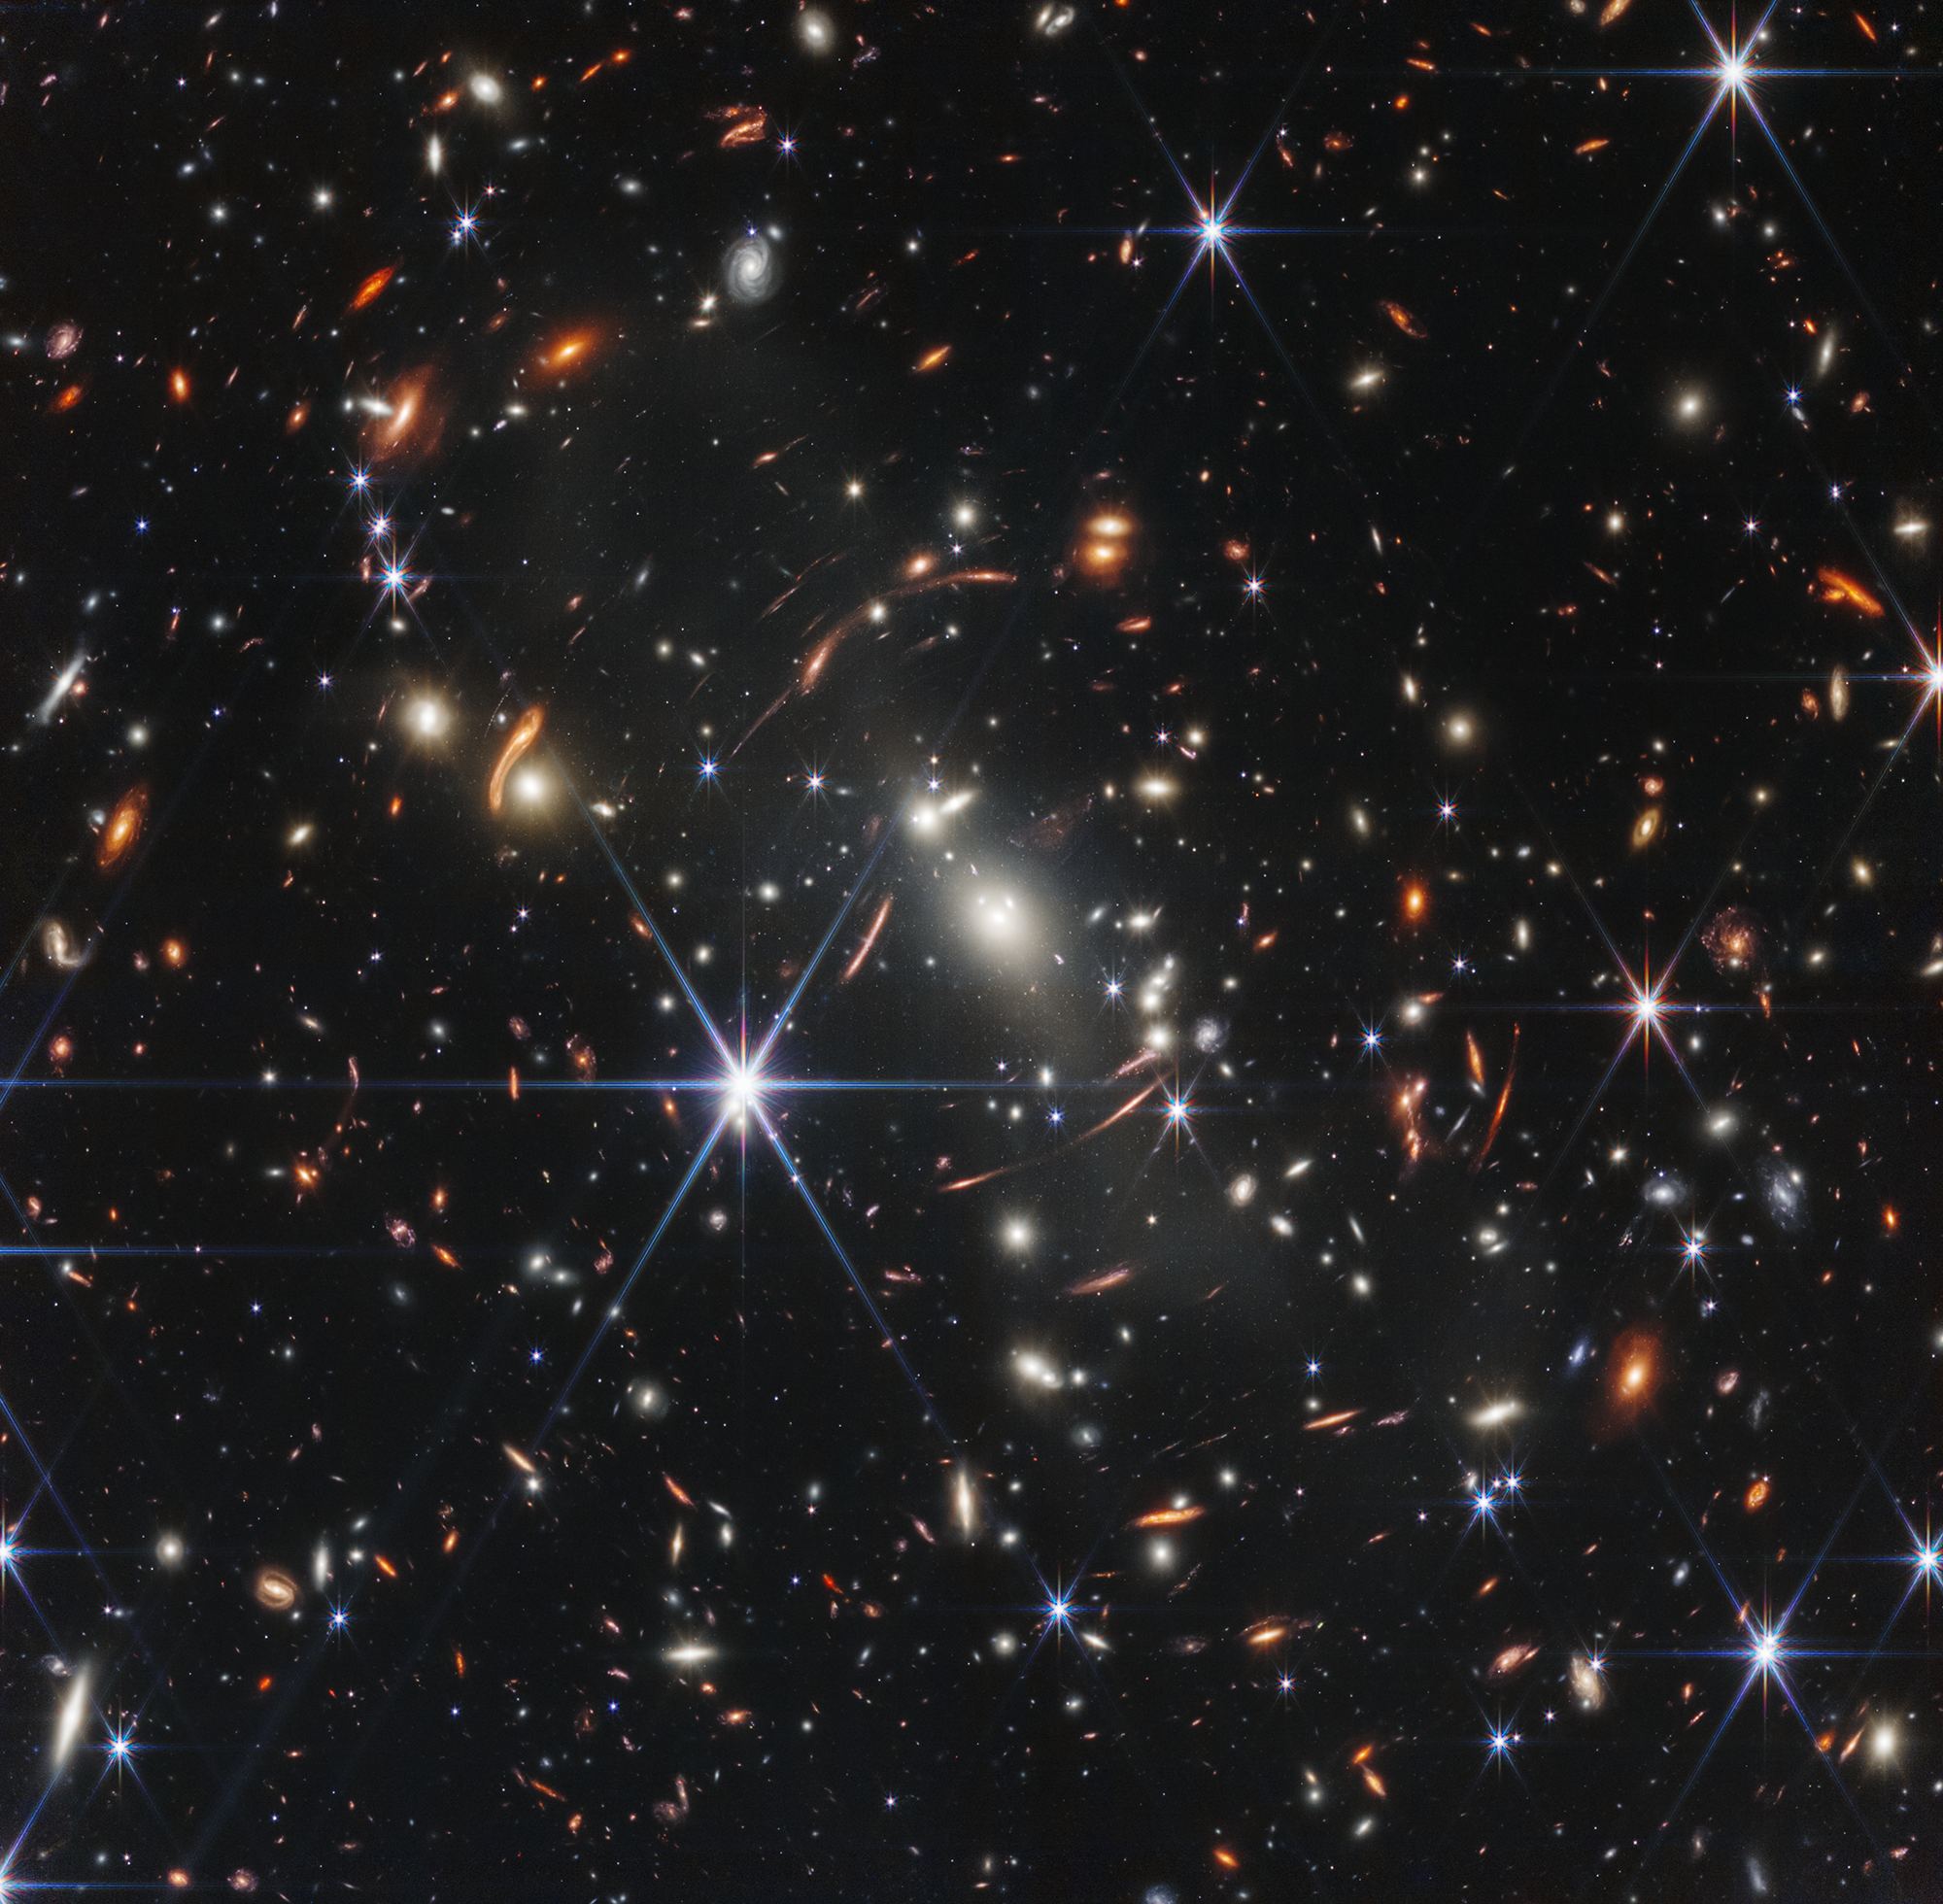 Millions Of Galaxies Revealed By NASA’s James Webb Space Telescope